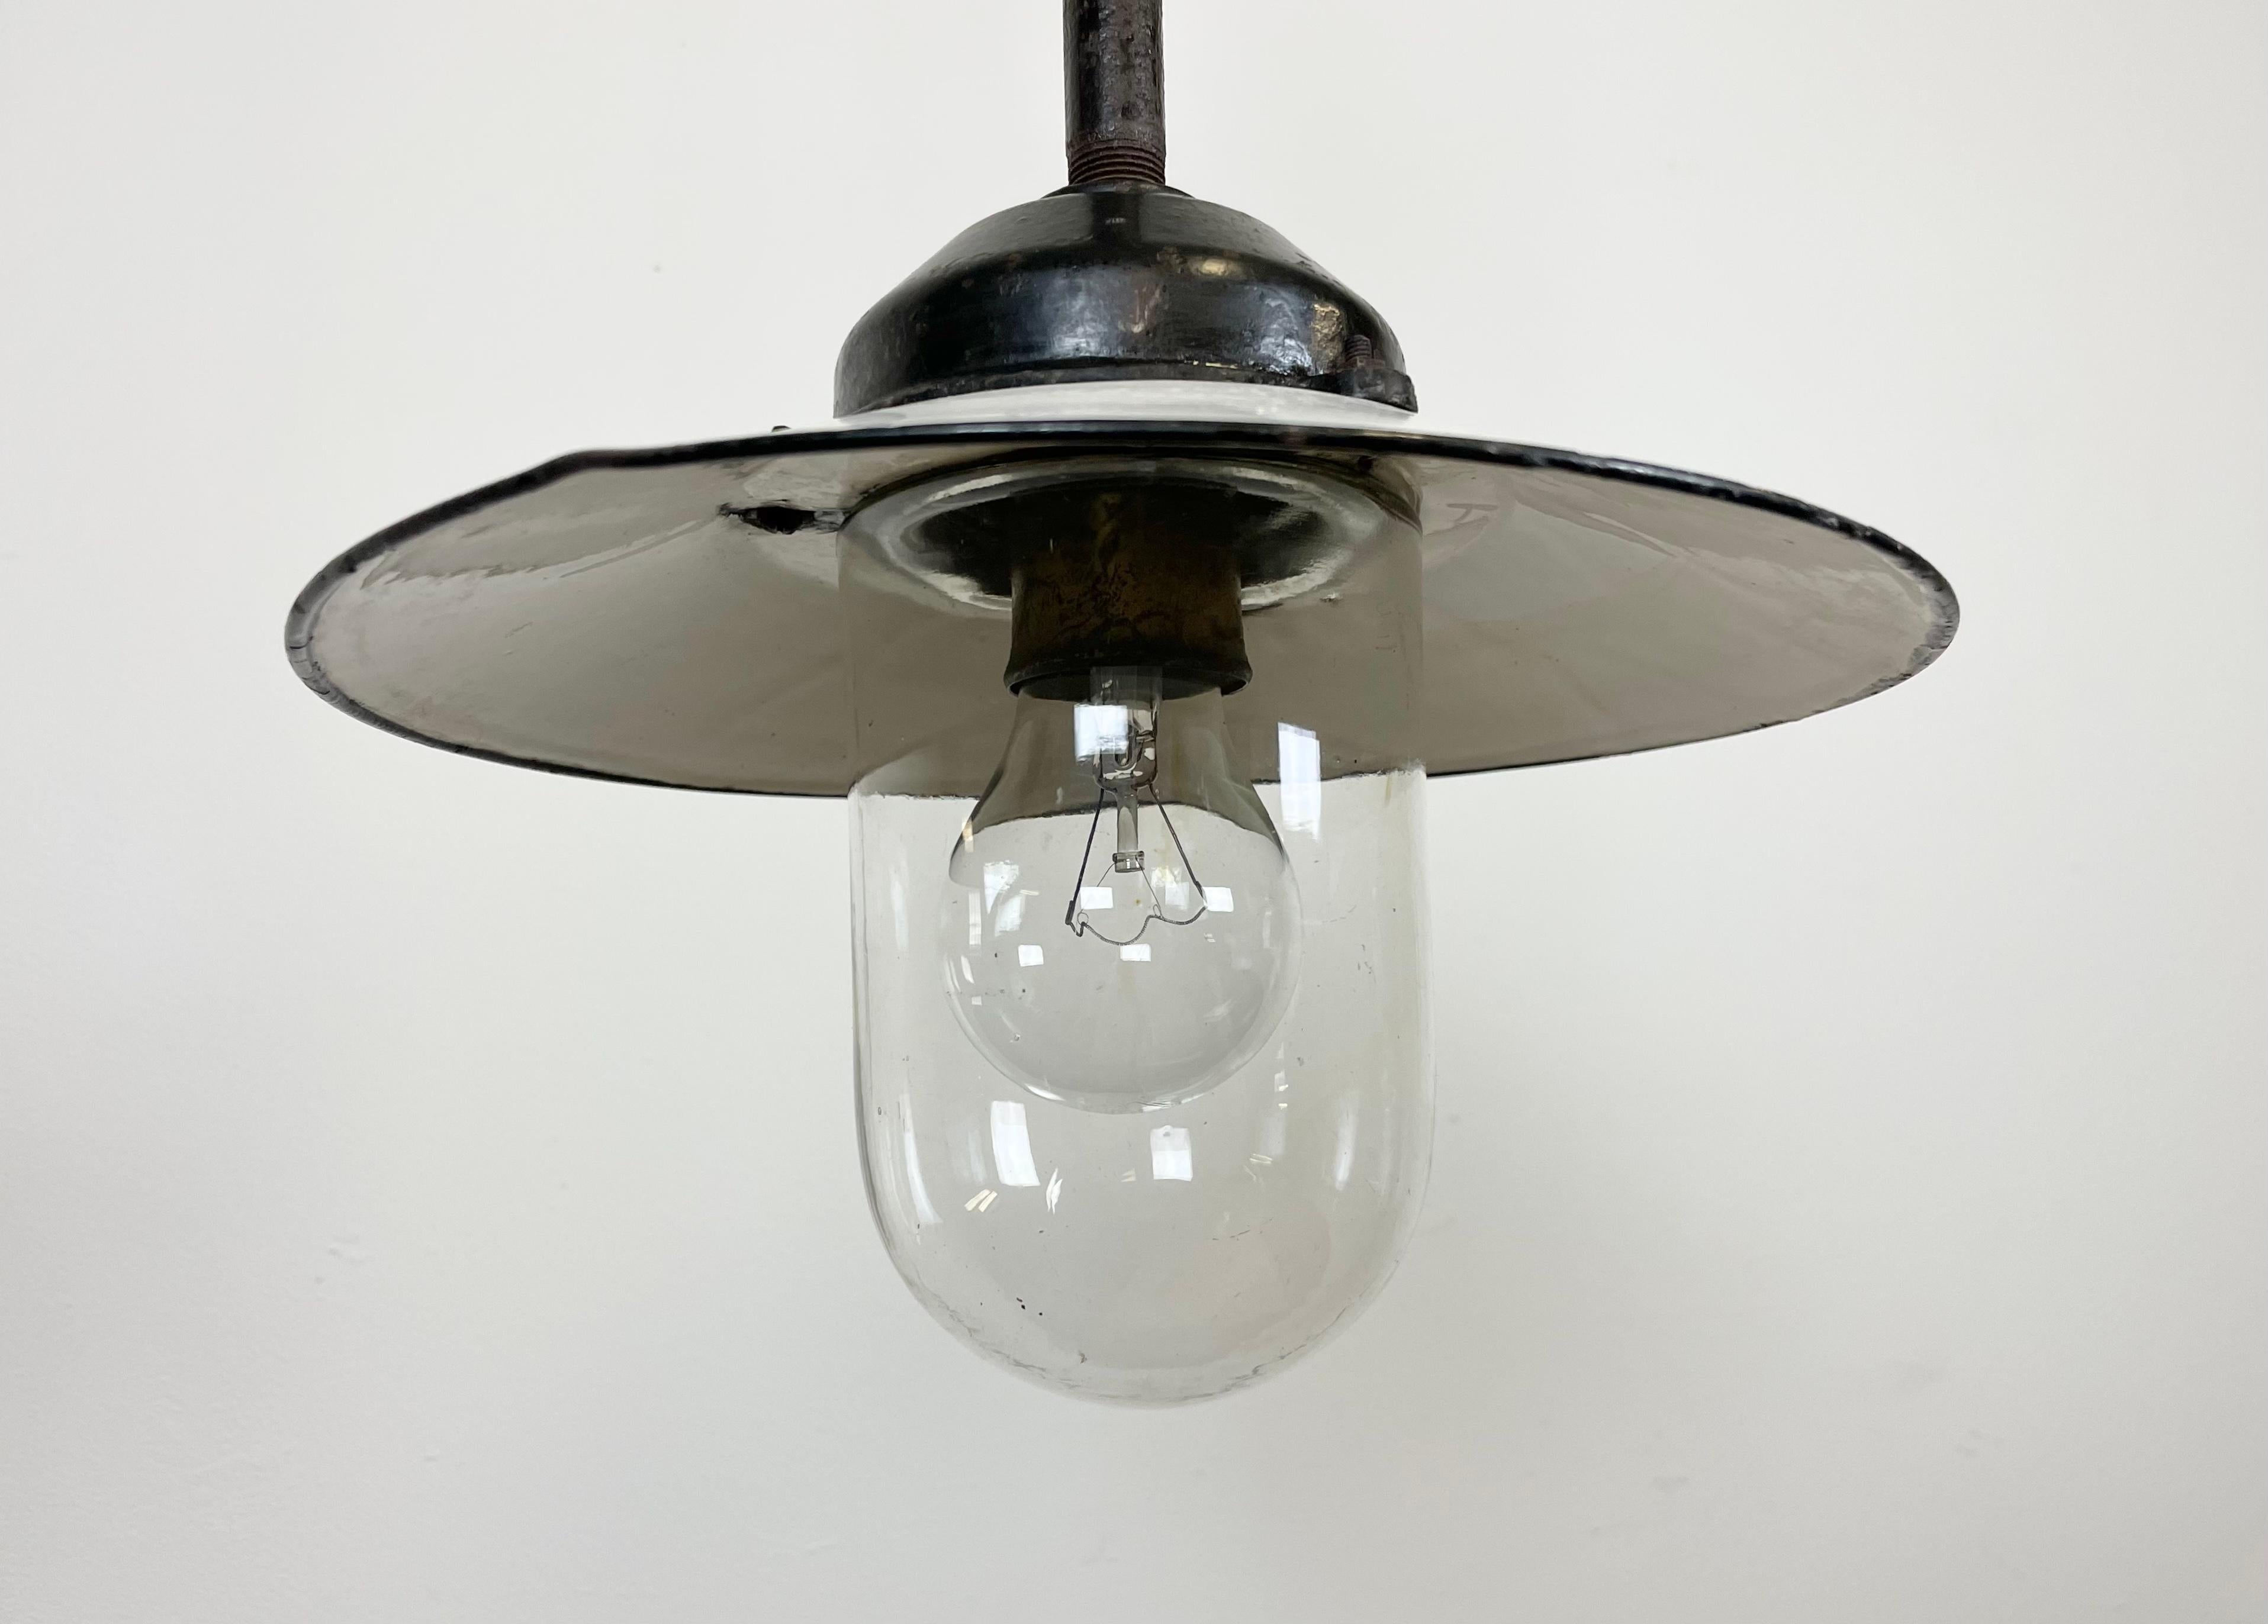 White Enamel and Cast Iron Industrial Pendant Light from Helo Leuchten, 1950s For Sale 1